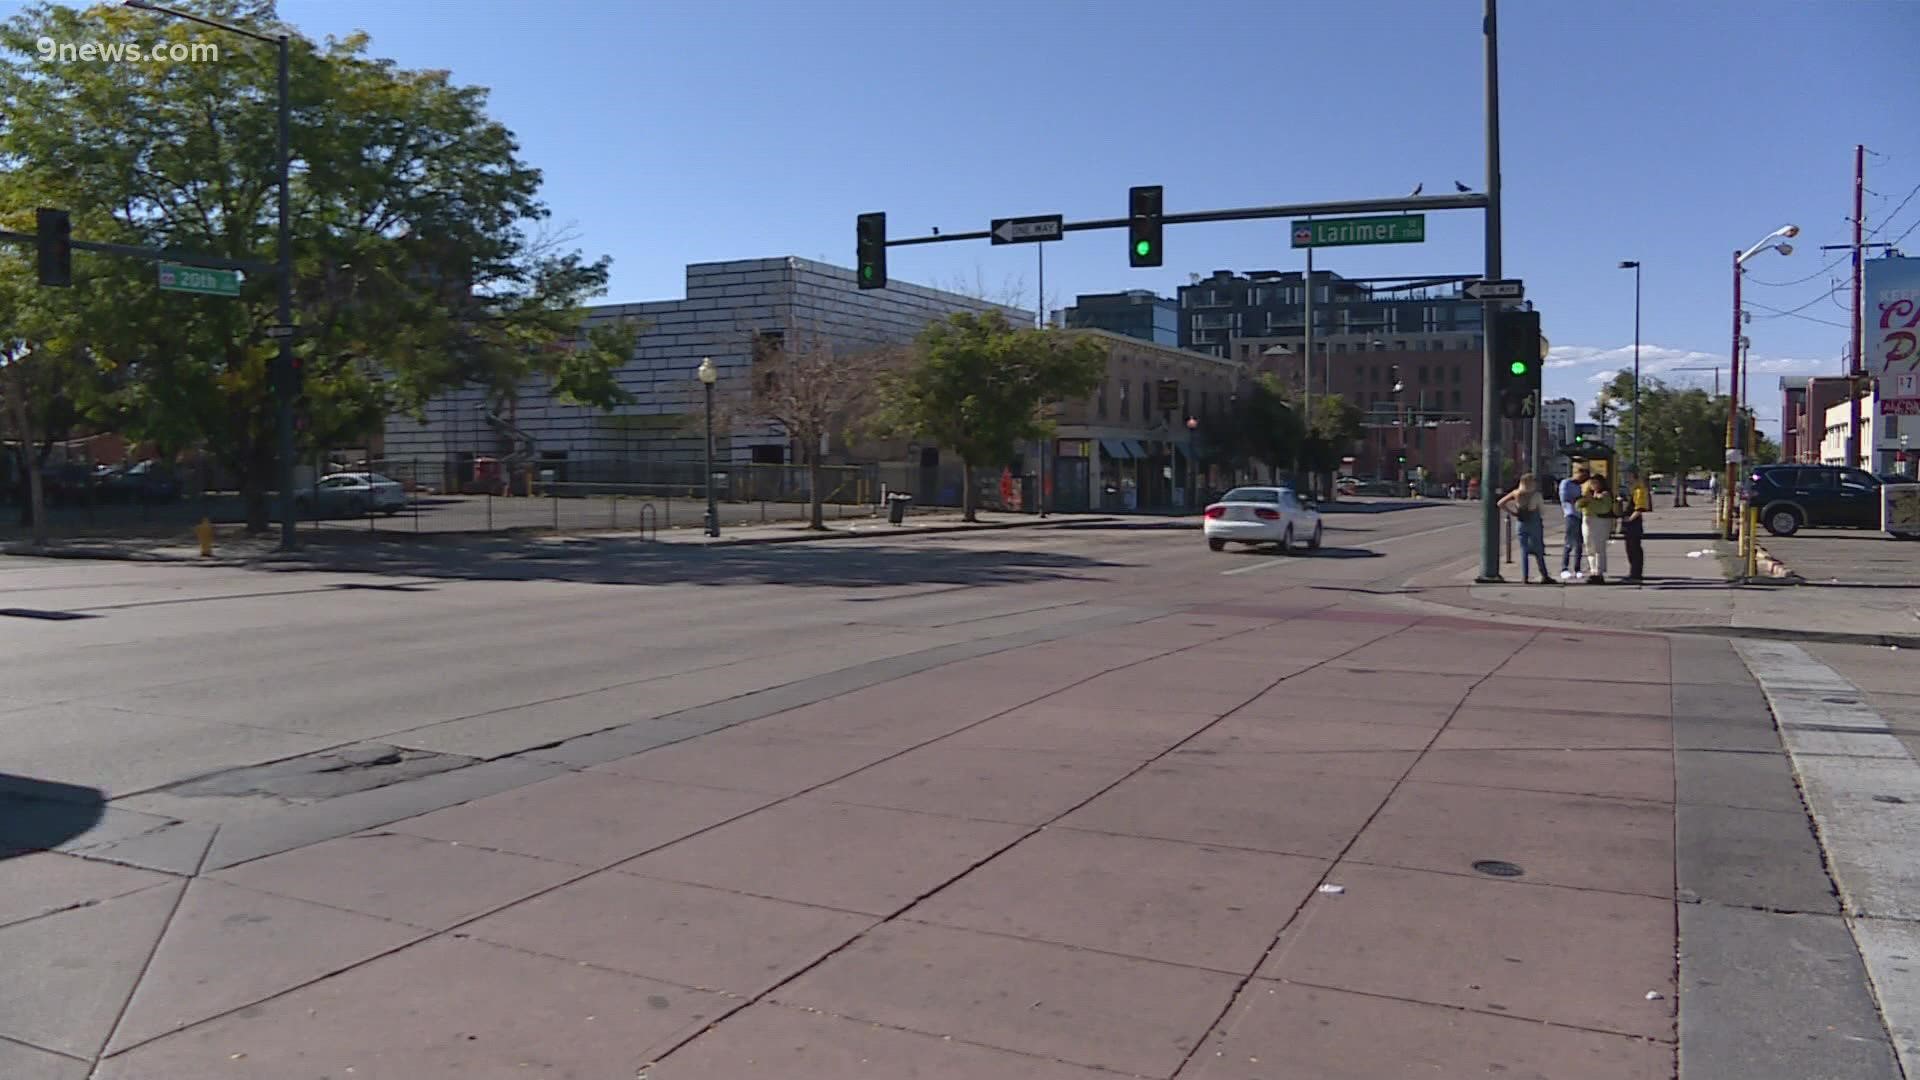 Denver Police said a pedestrian was hit by a car early Saturday at 20th and Larimer streets.